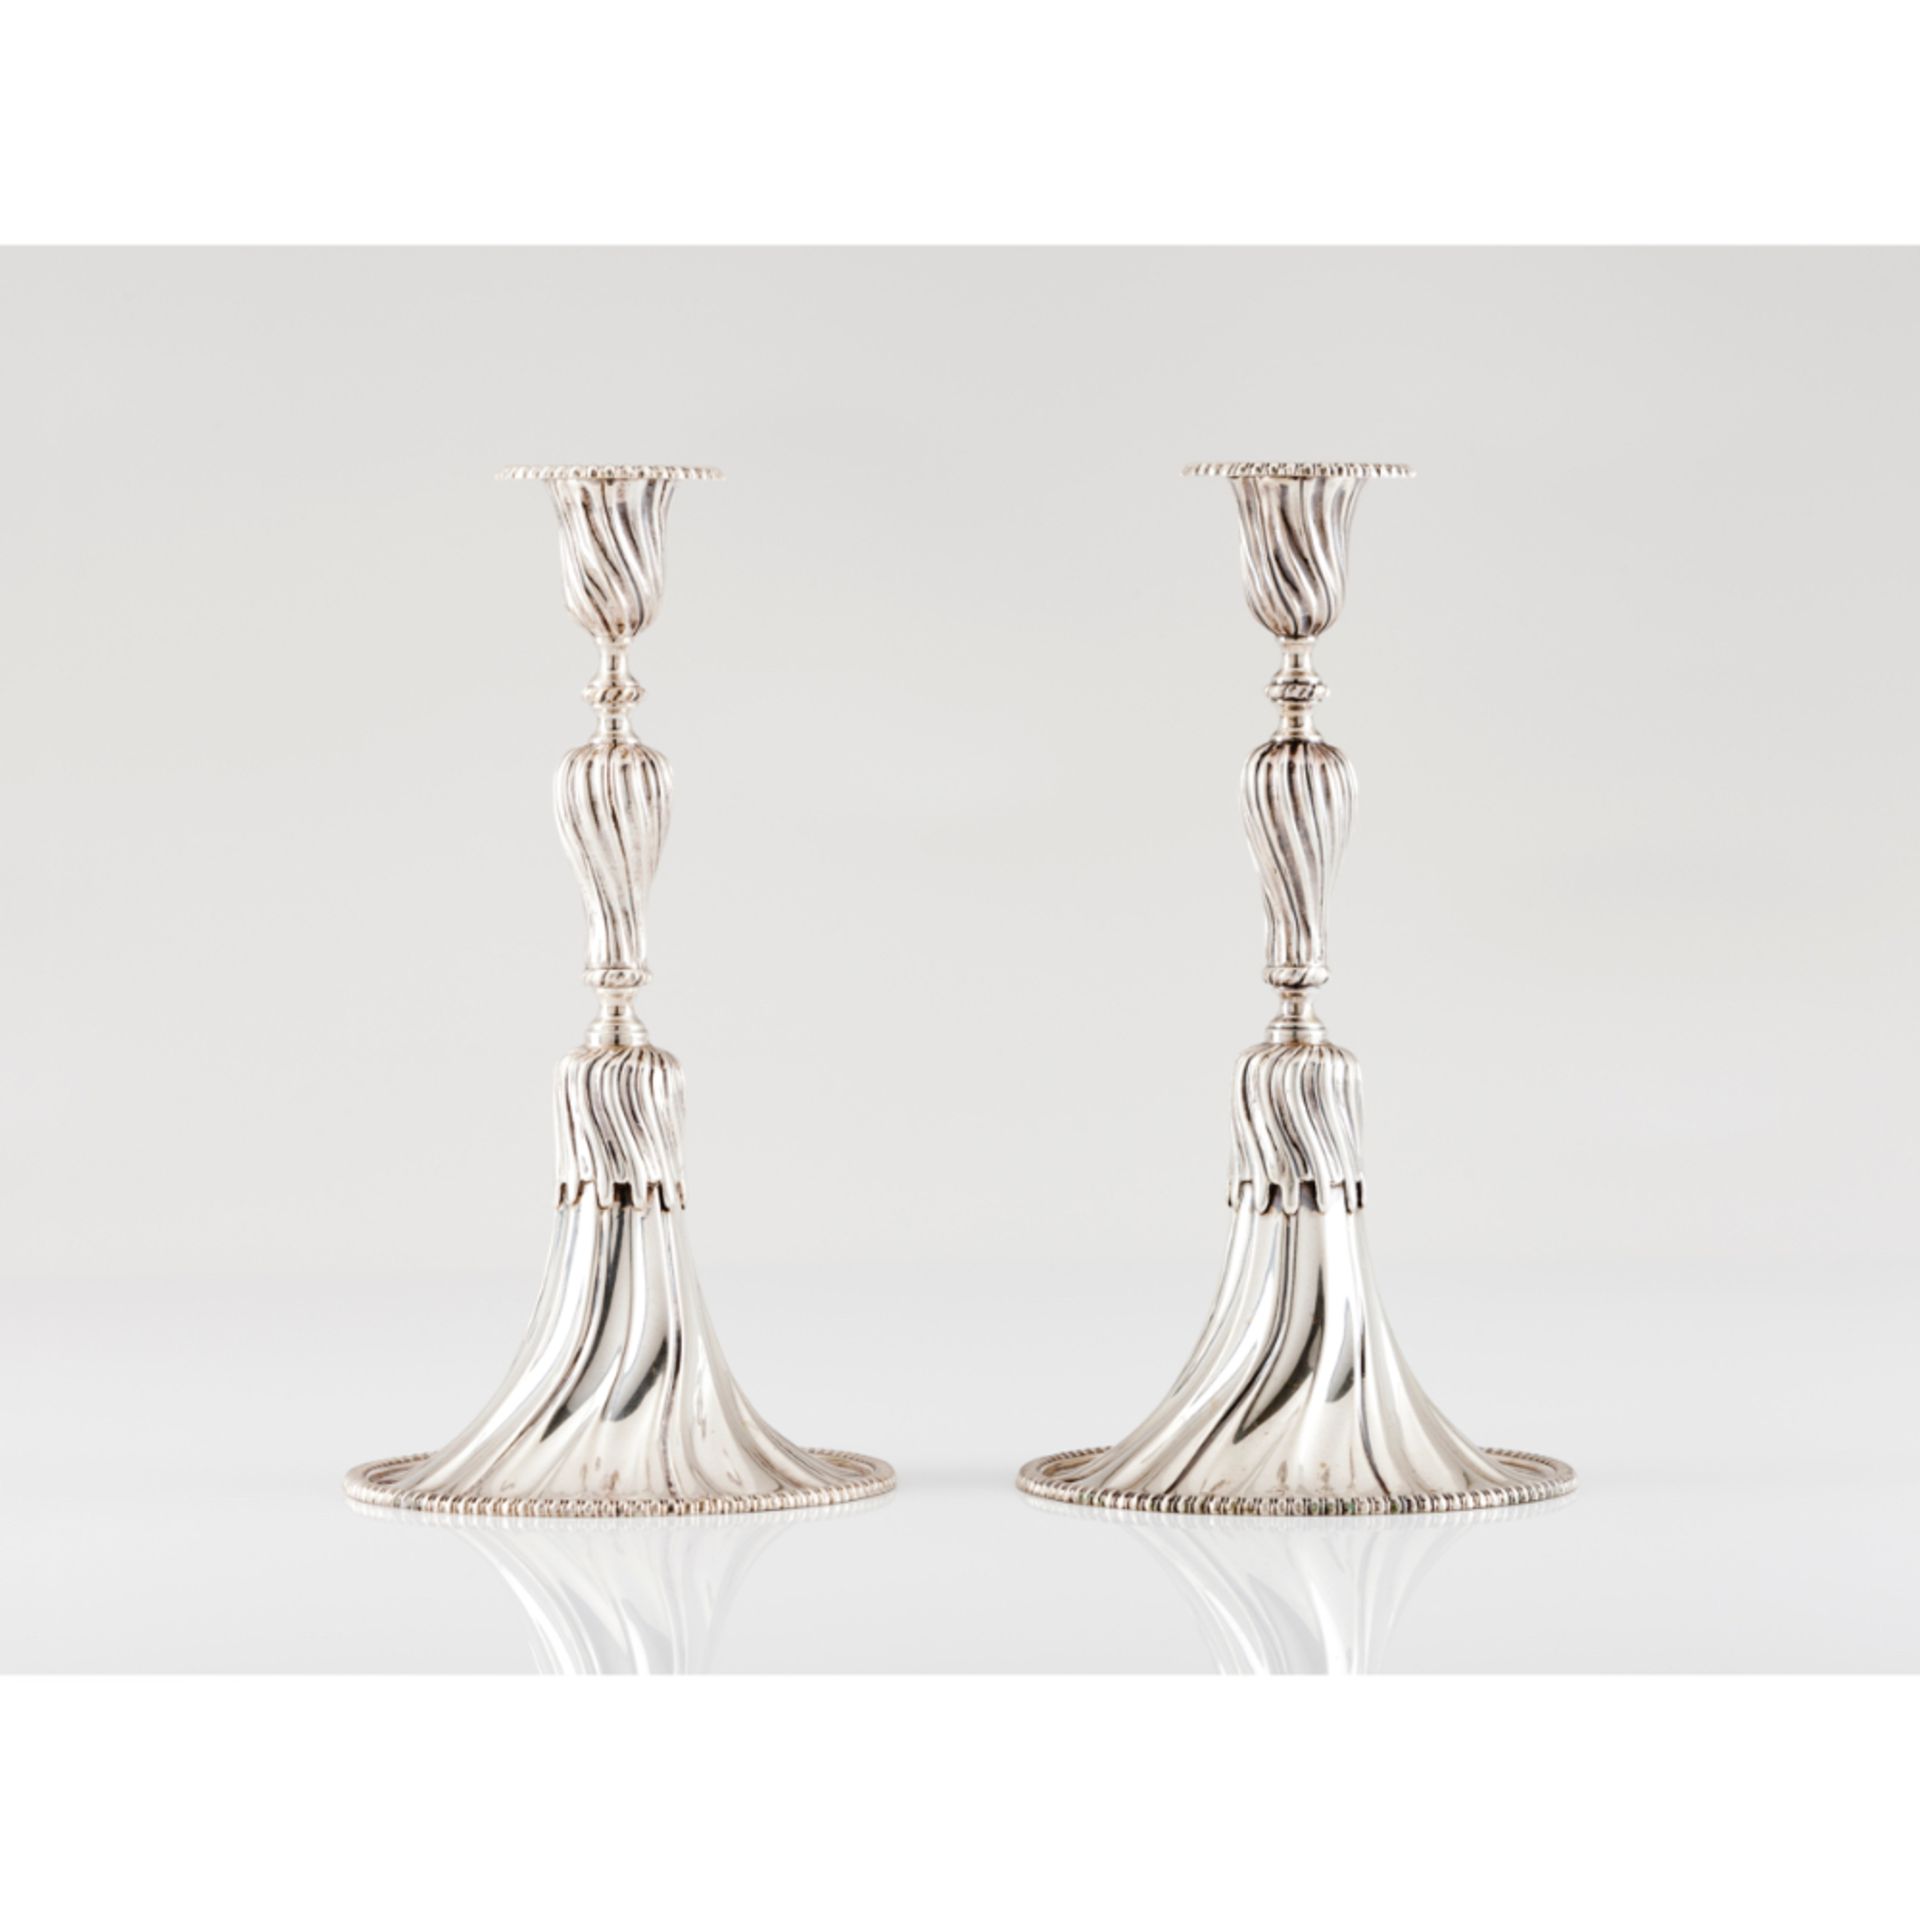 A pair of apron candle sticksPortuguese silver Spiralled decoration after 18th century prototype